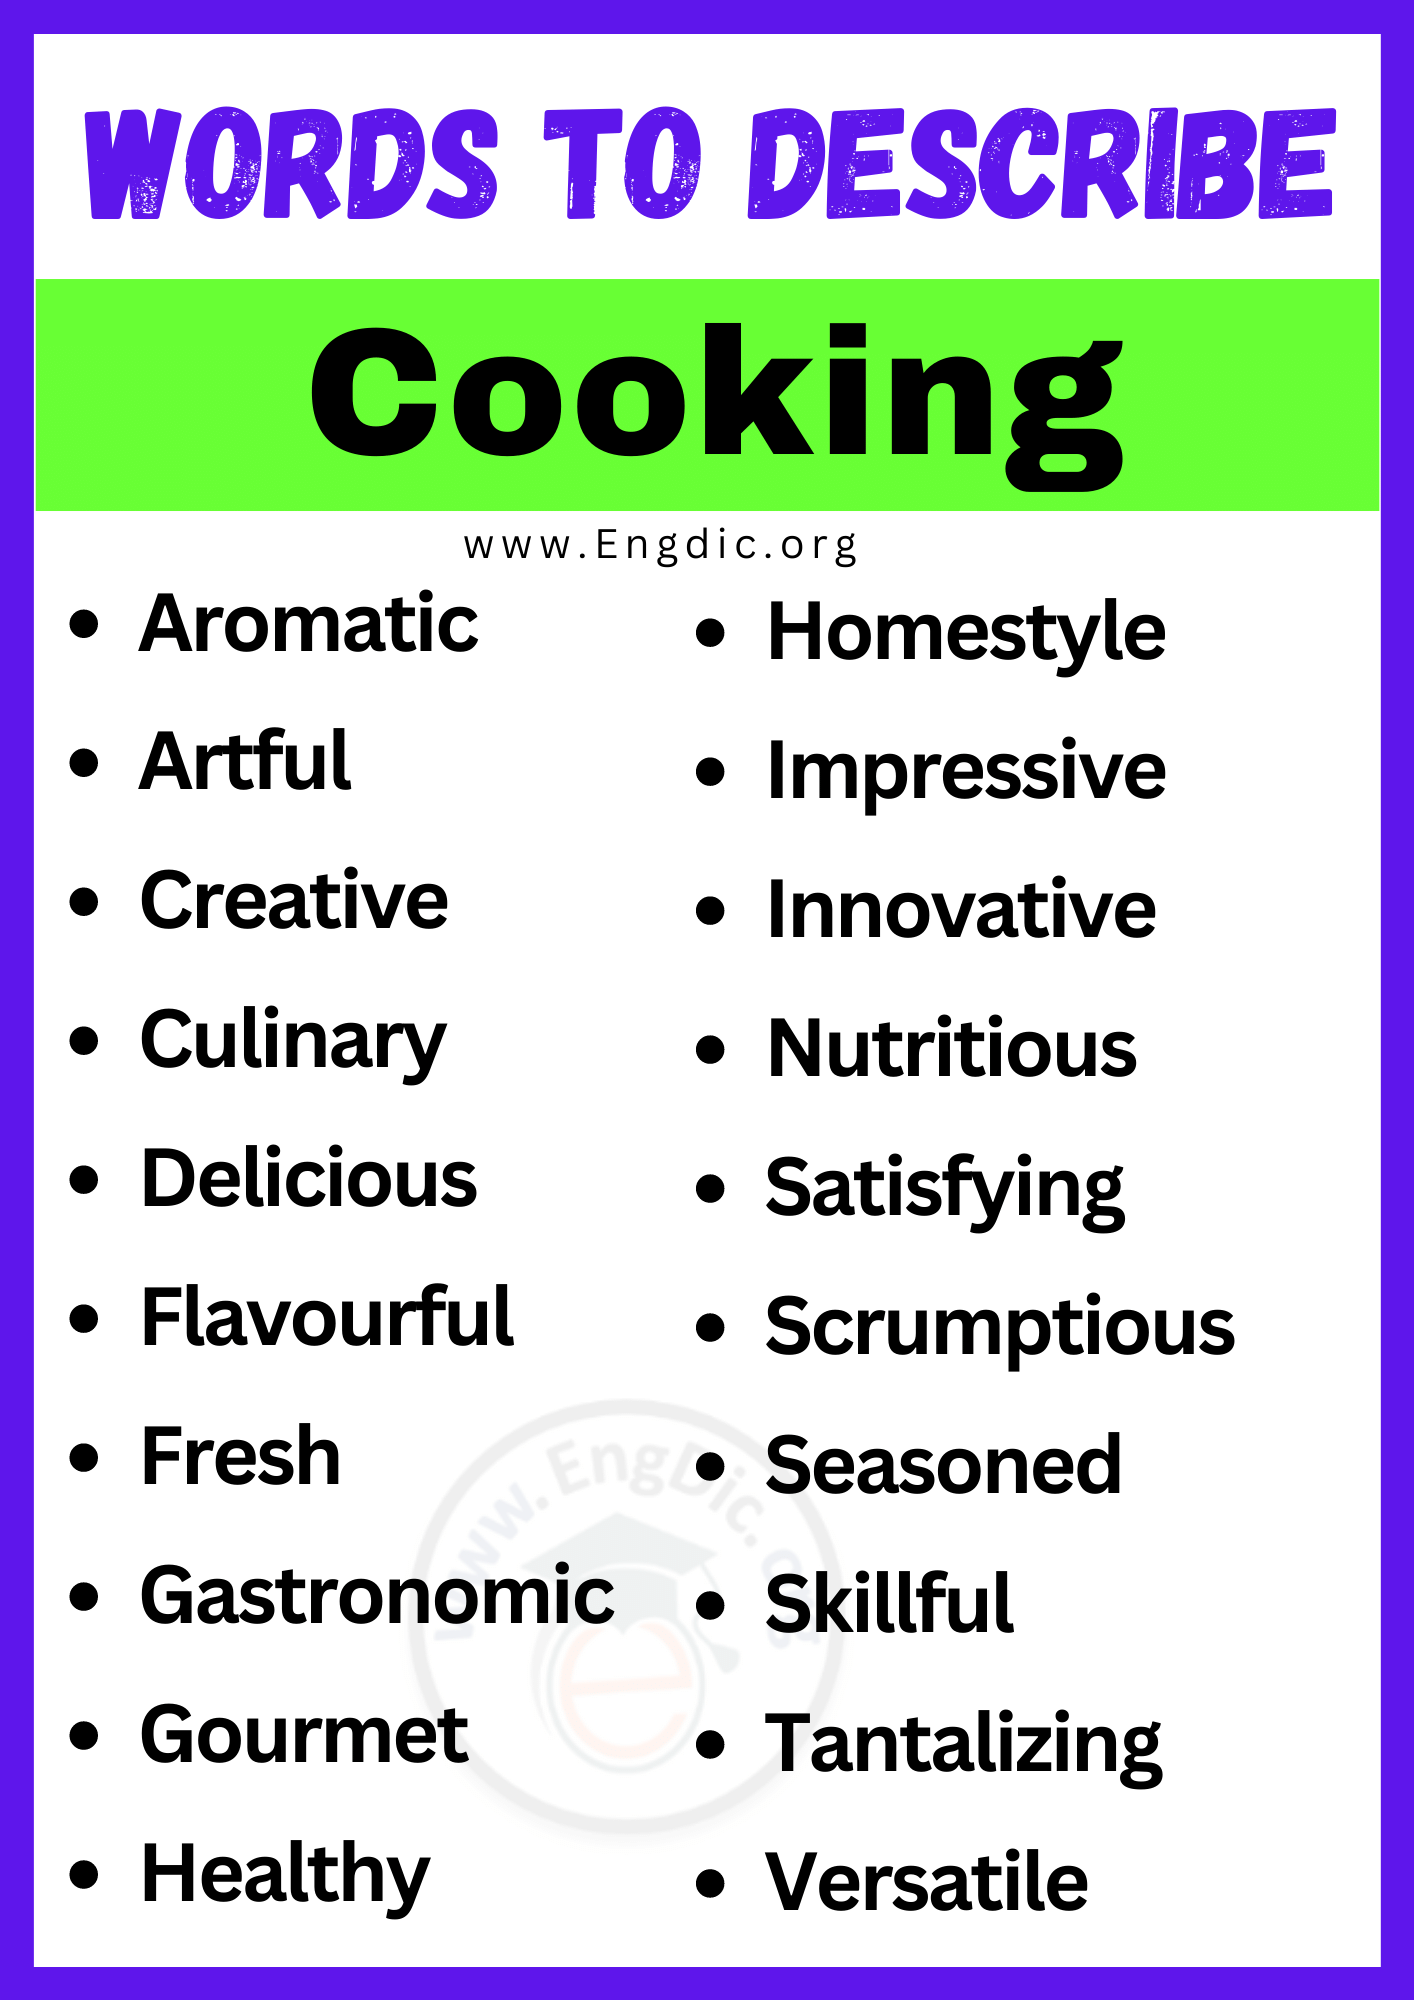 Words to Describe Cooking